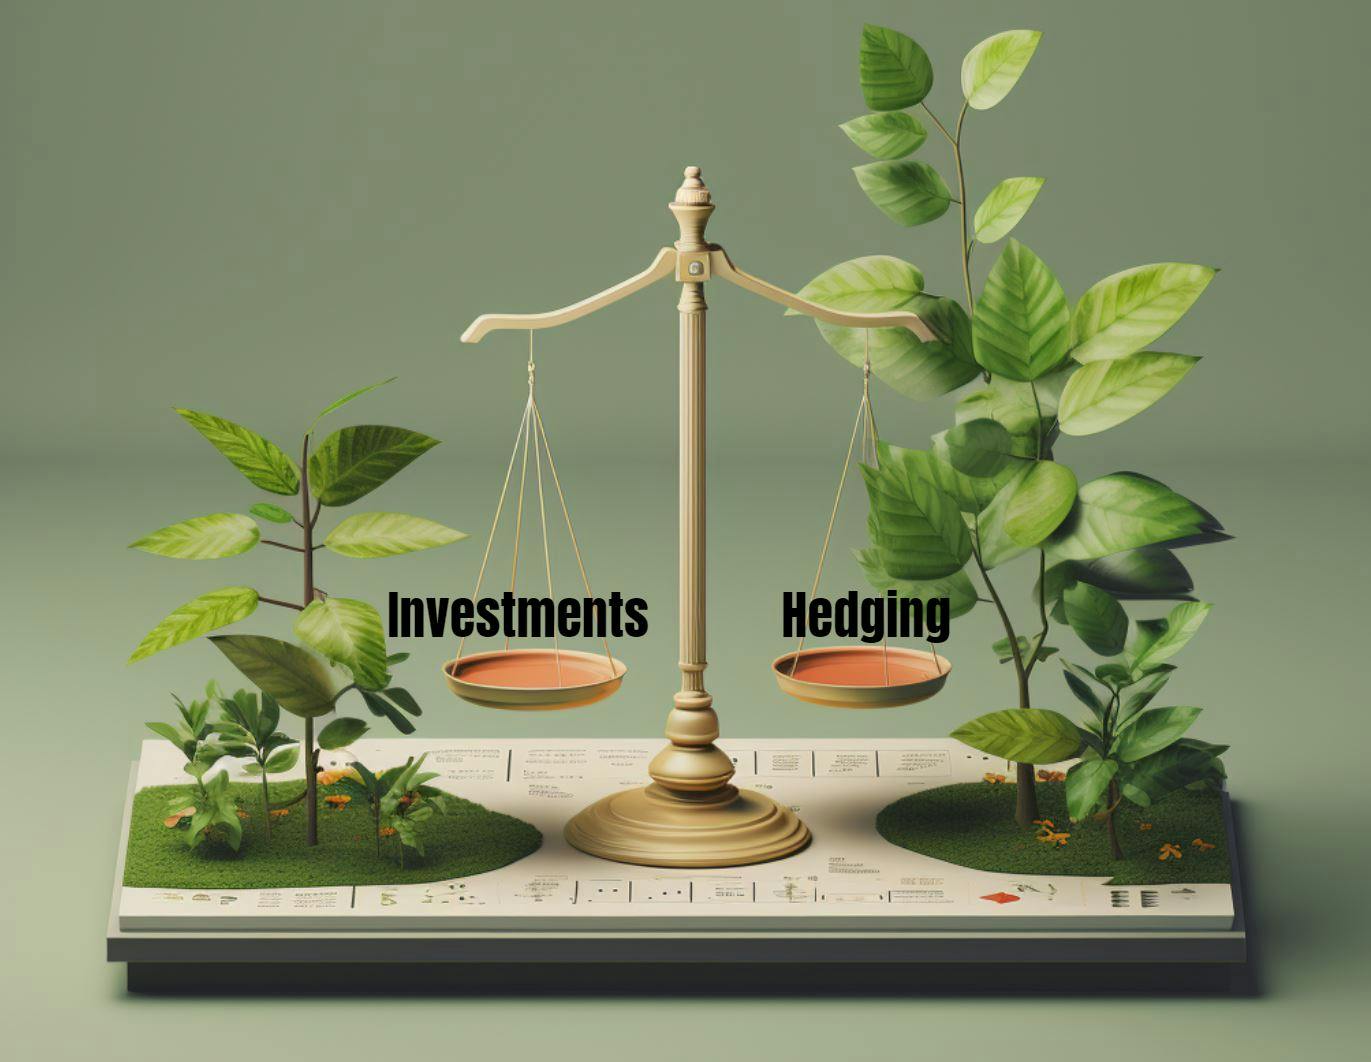 Balance in your portfolio by hedging your investments